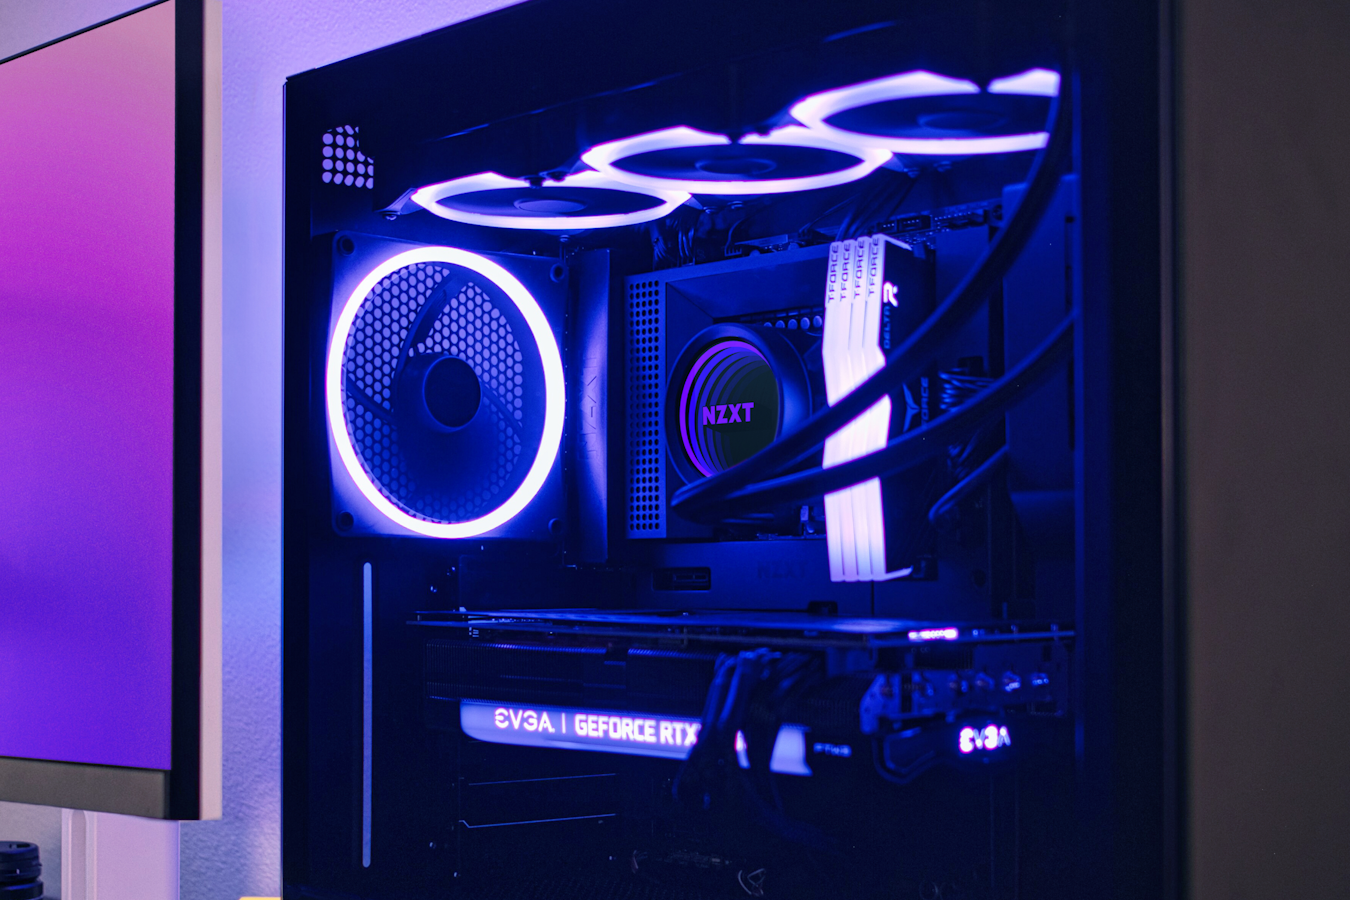 Sideshot of an NZXT case that looks through the clear, glass sidepanel. The shot is dimly lit, showcasing krakens with RGB and other RGB elements that light up the PC components and cables in the case.